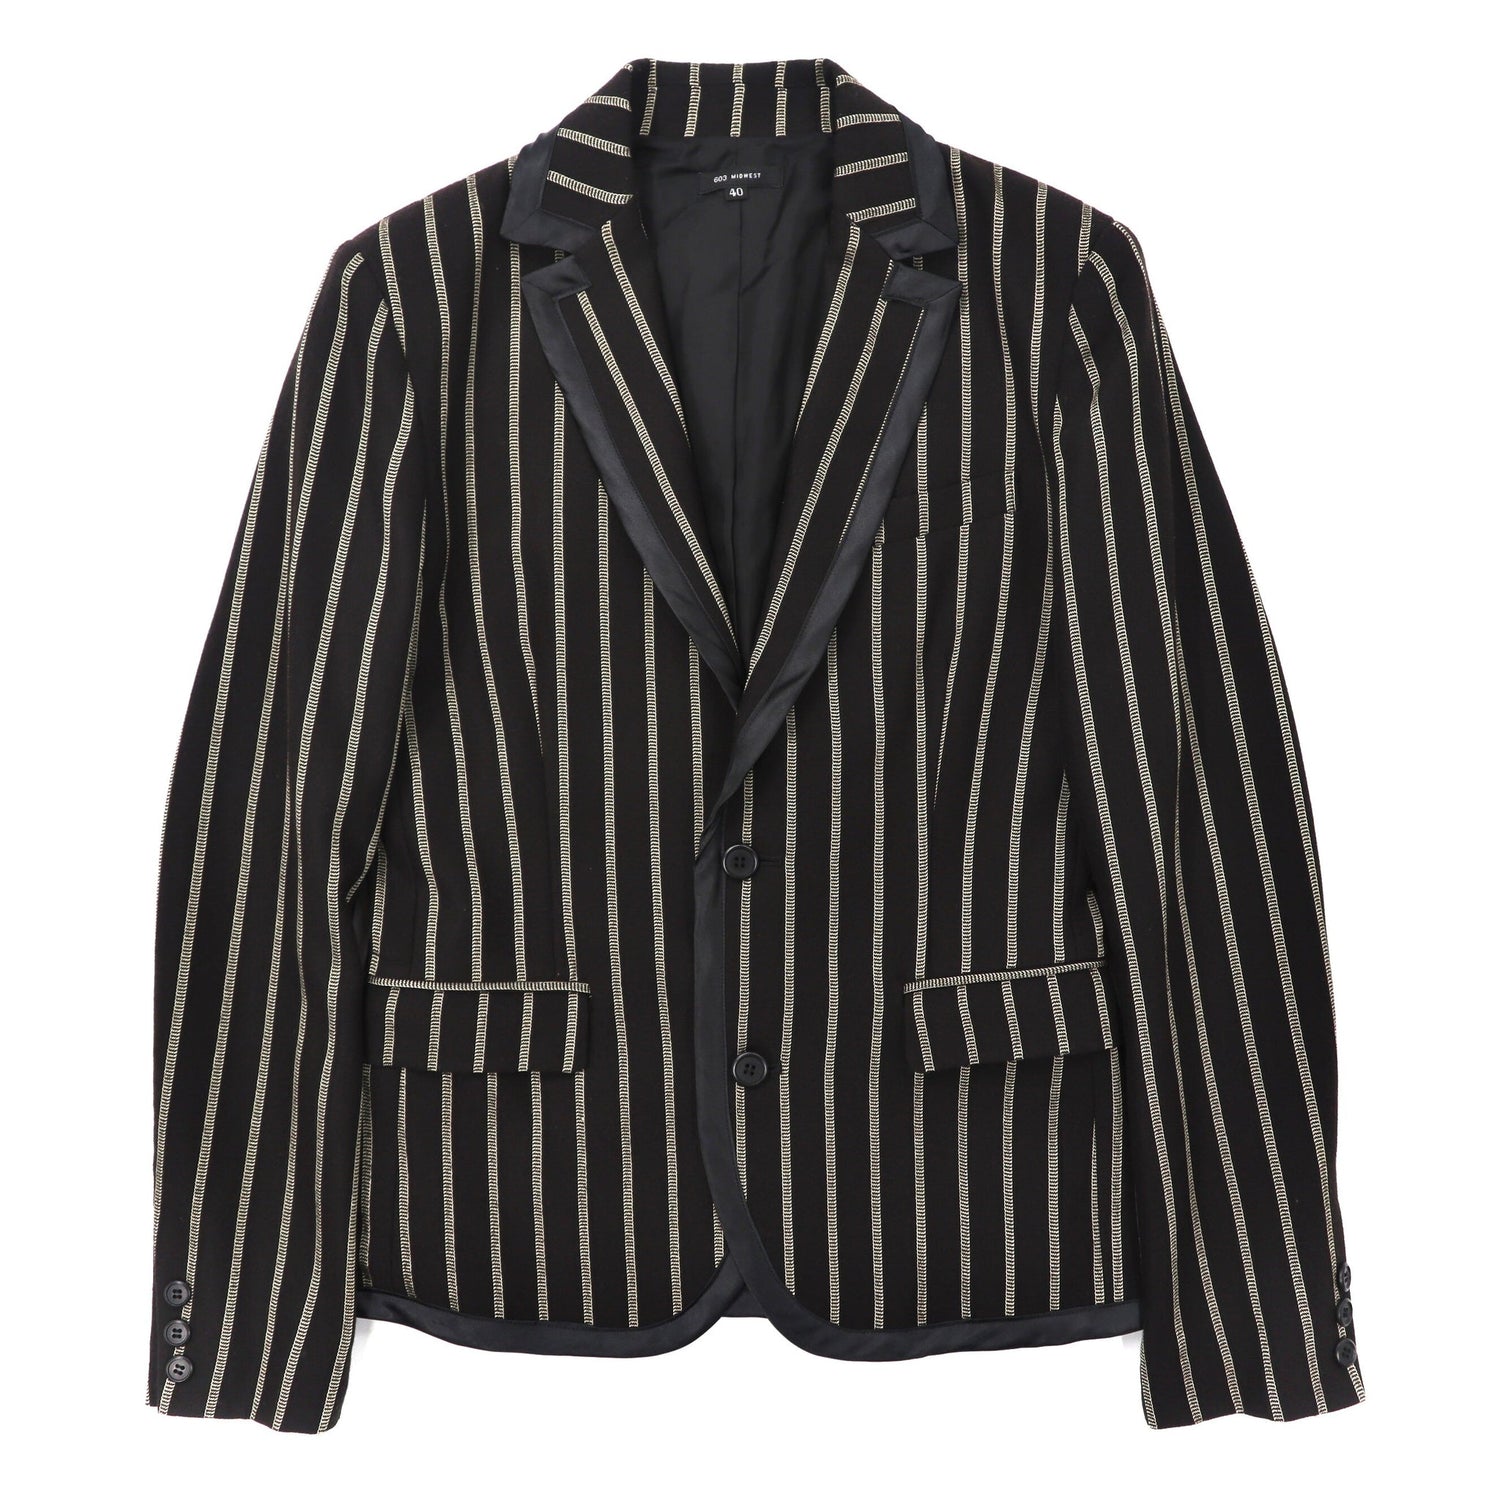 603 MIDWEST Tailored Jacket 40 Black Striped Japan Made